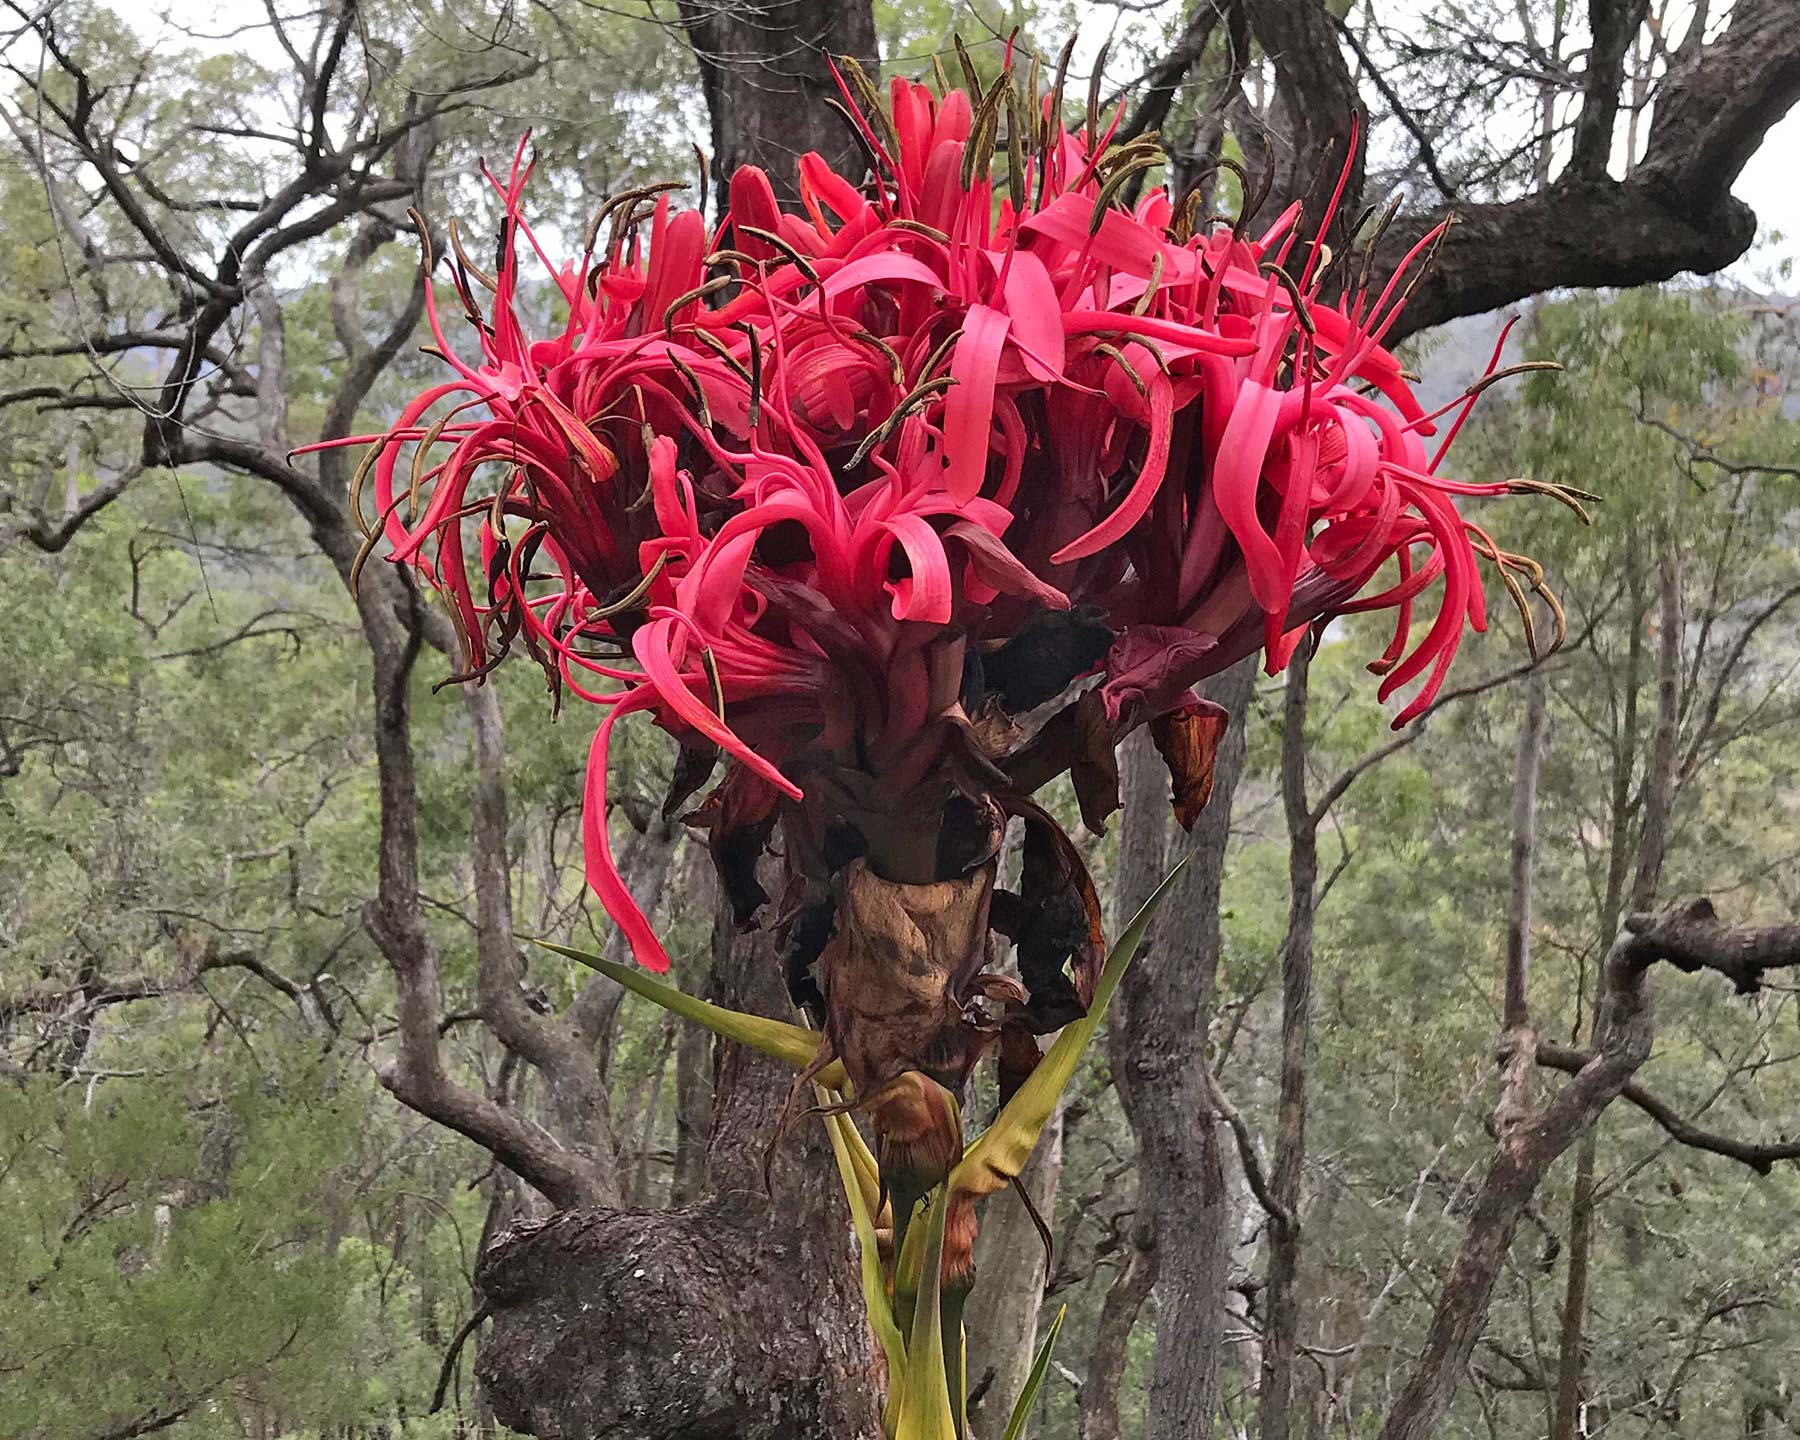 Gymea Lily, Doryanthes excelsa